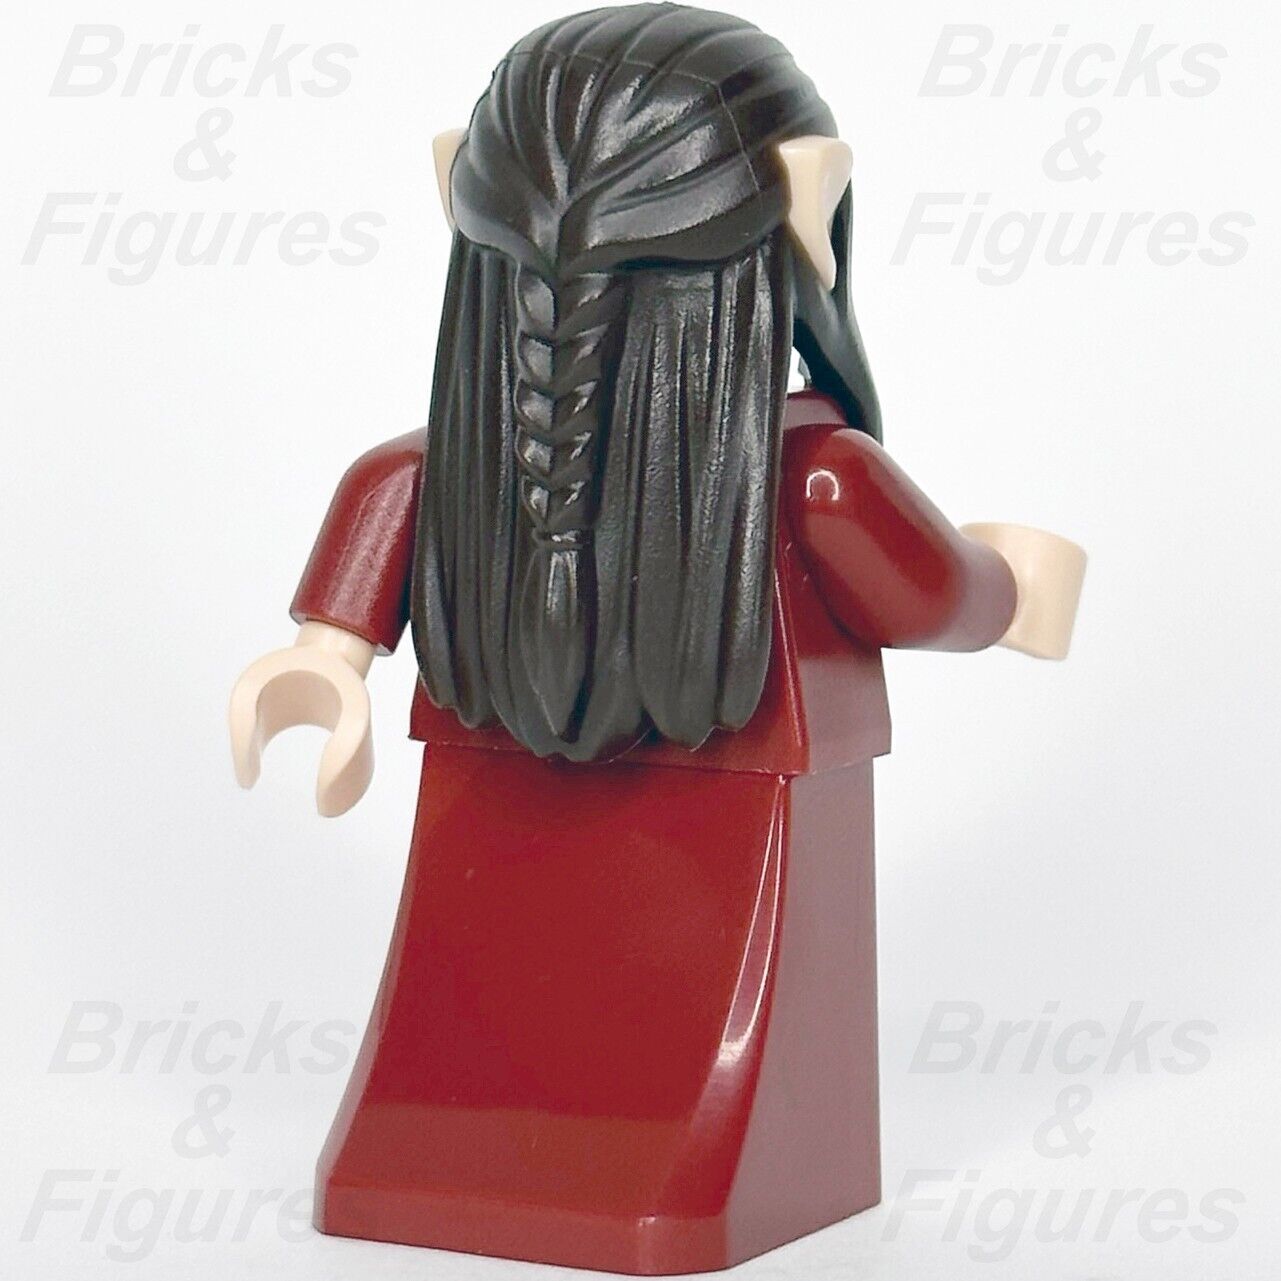 LEGO Elrond Minifigure The Hobbit & The Lord of the Rings Elf 10316 lor128 LOTR - Bricks & Figures